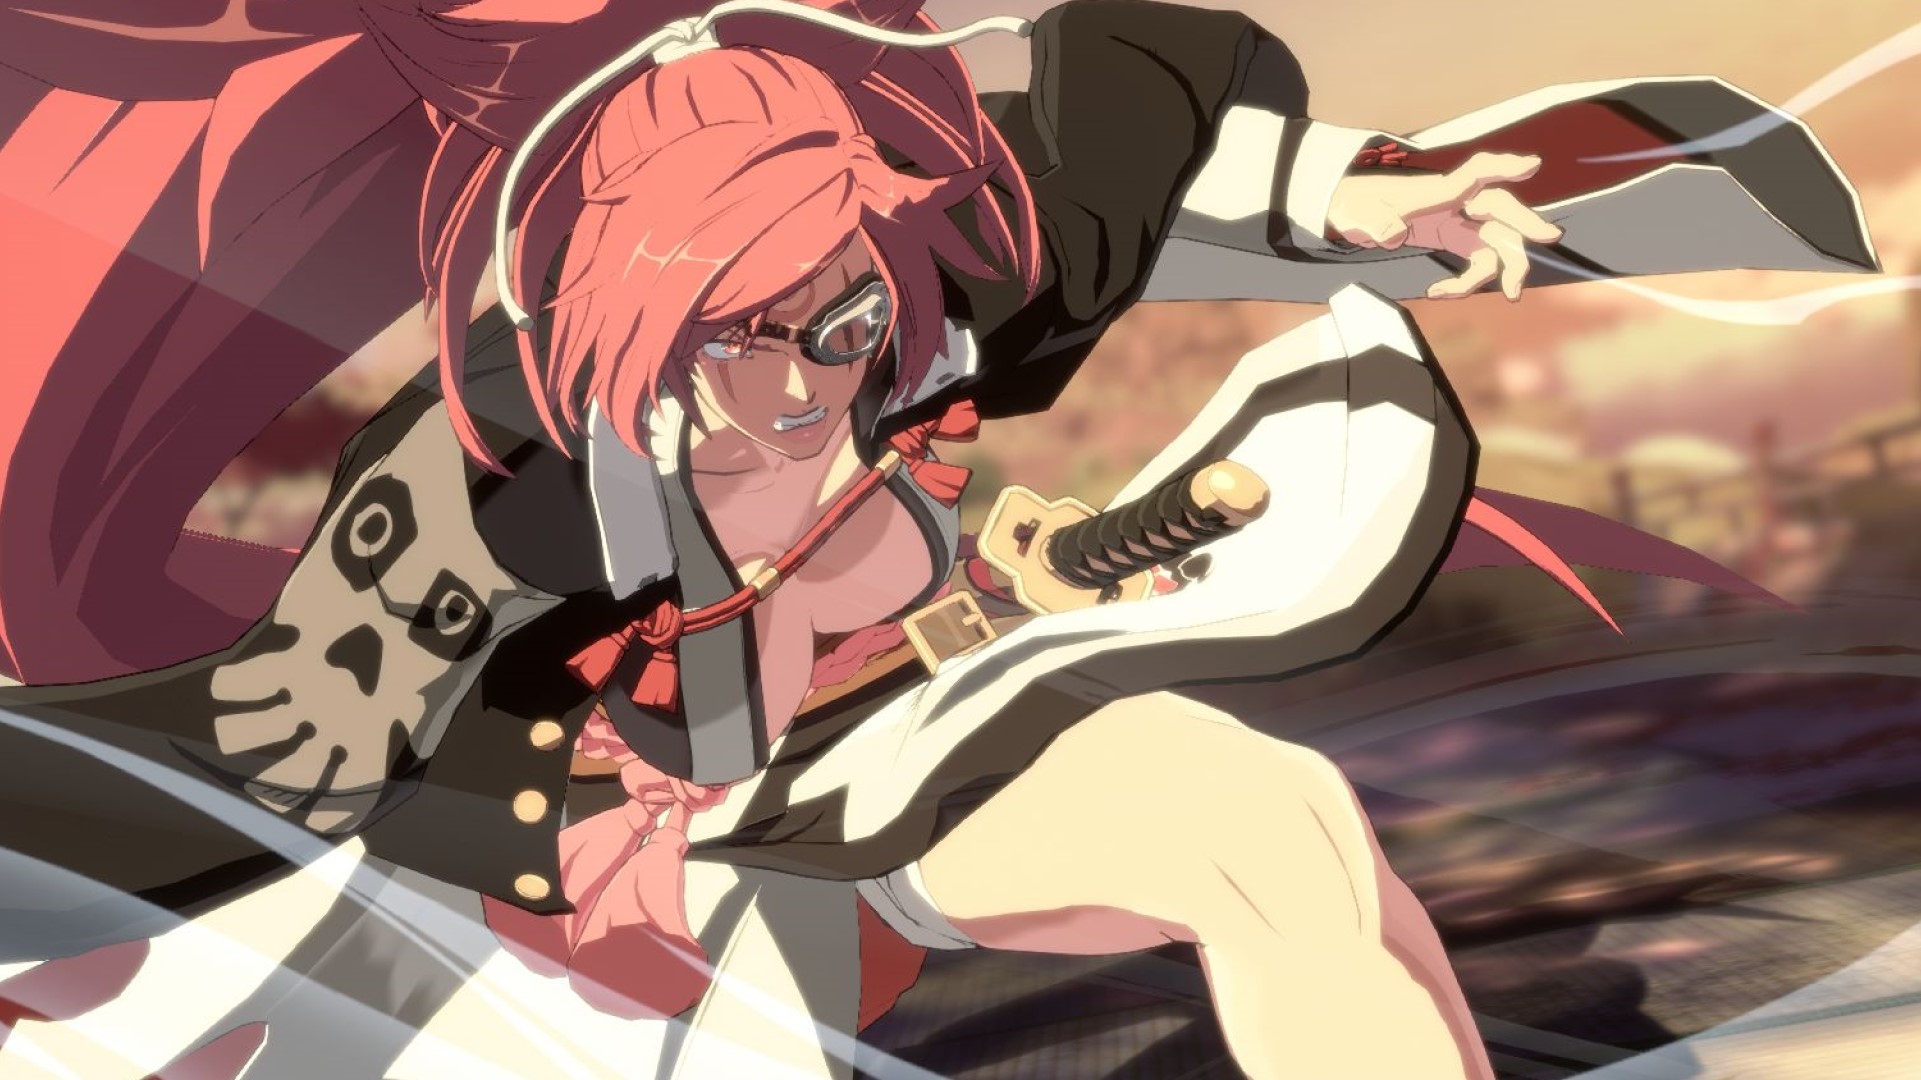 Pink-haired female anime character wallpaper, artwork, Guilty